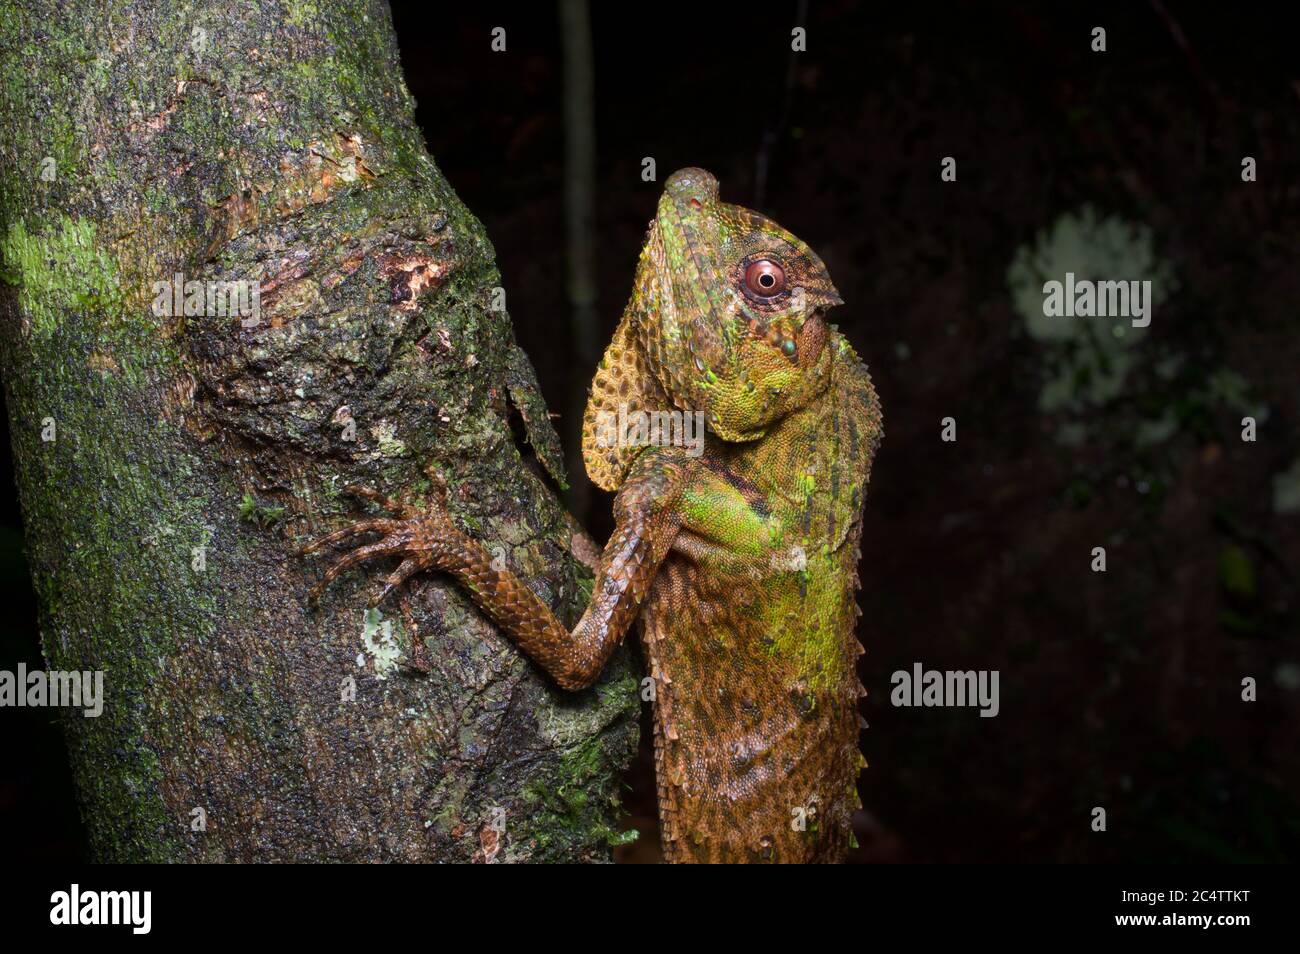 An adult Hump-nosed Lizard (Lyriocephalus scutatus) clinging to a branch at night in Sri Lanka. Stock Photo